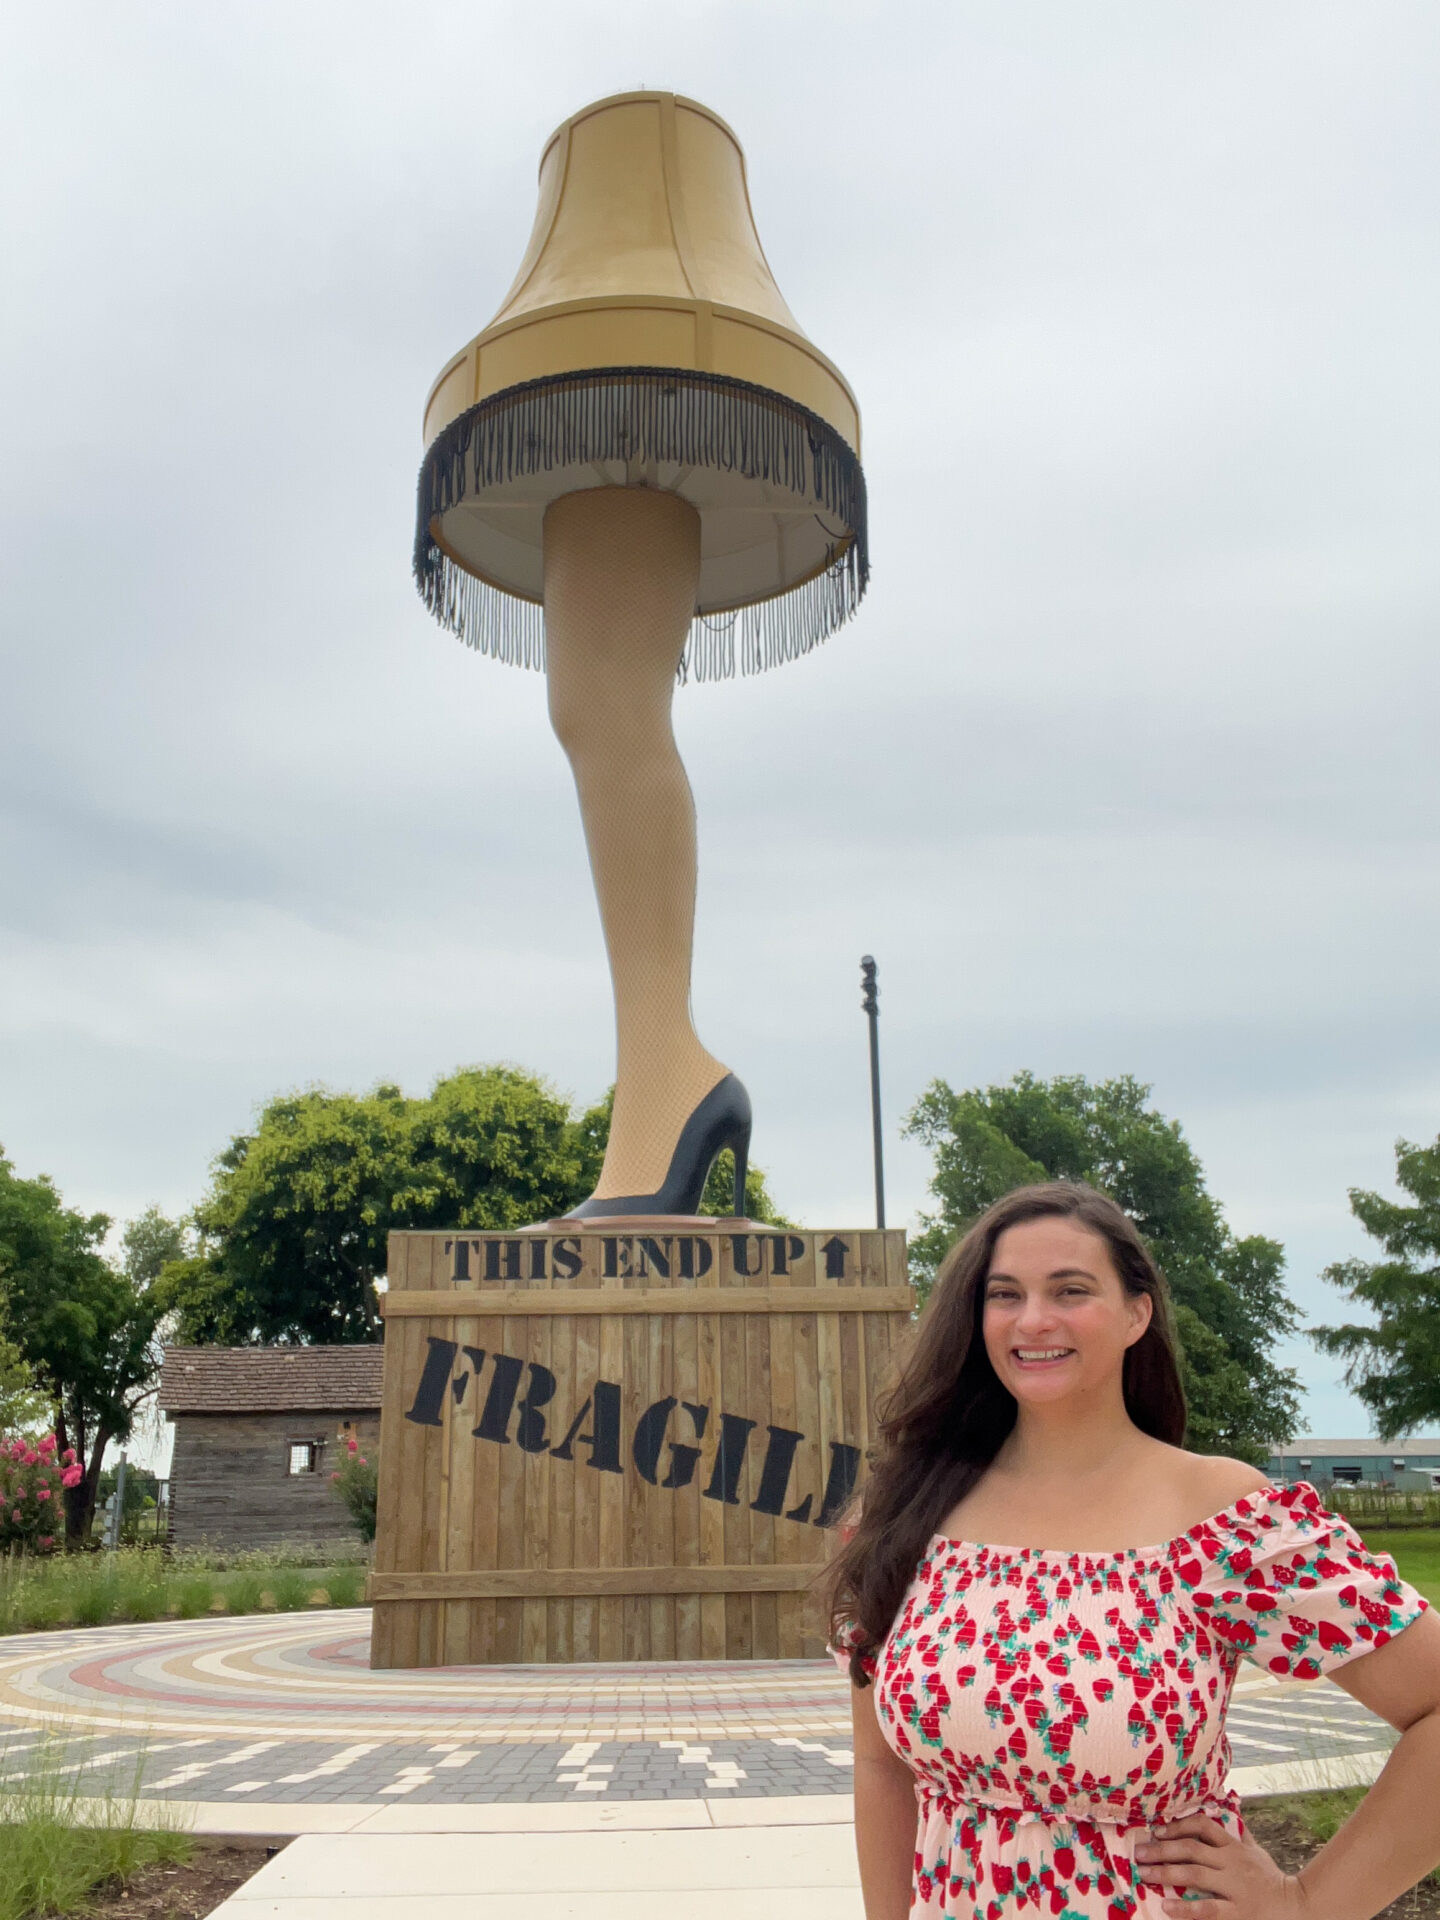 Woman standing in front of giant leg lamp